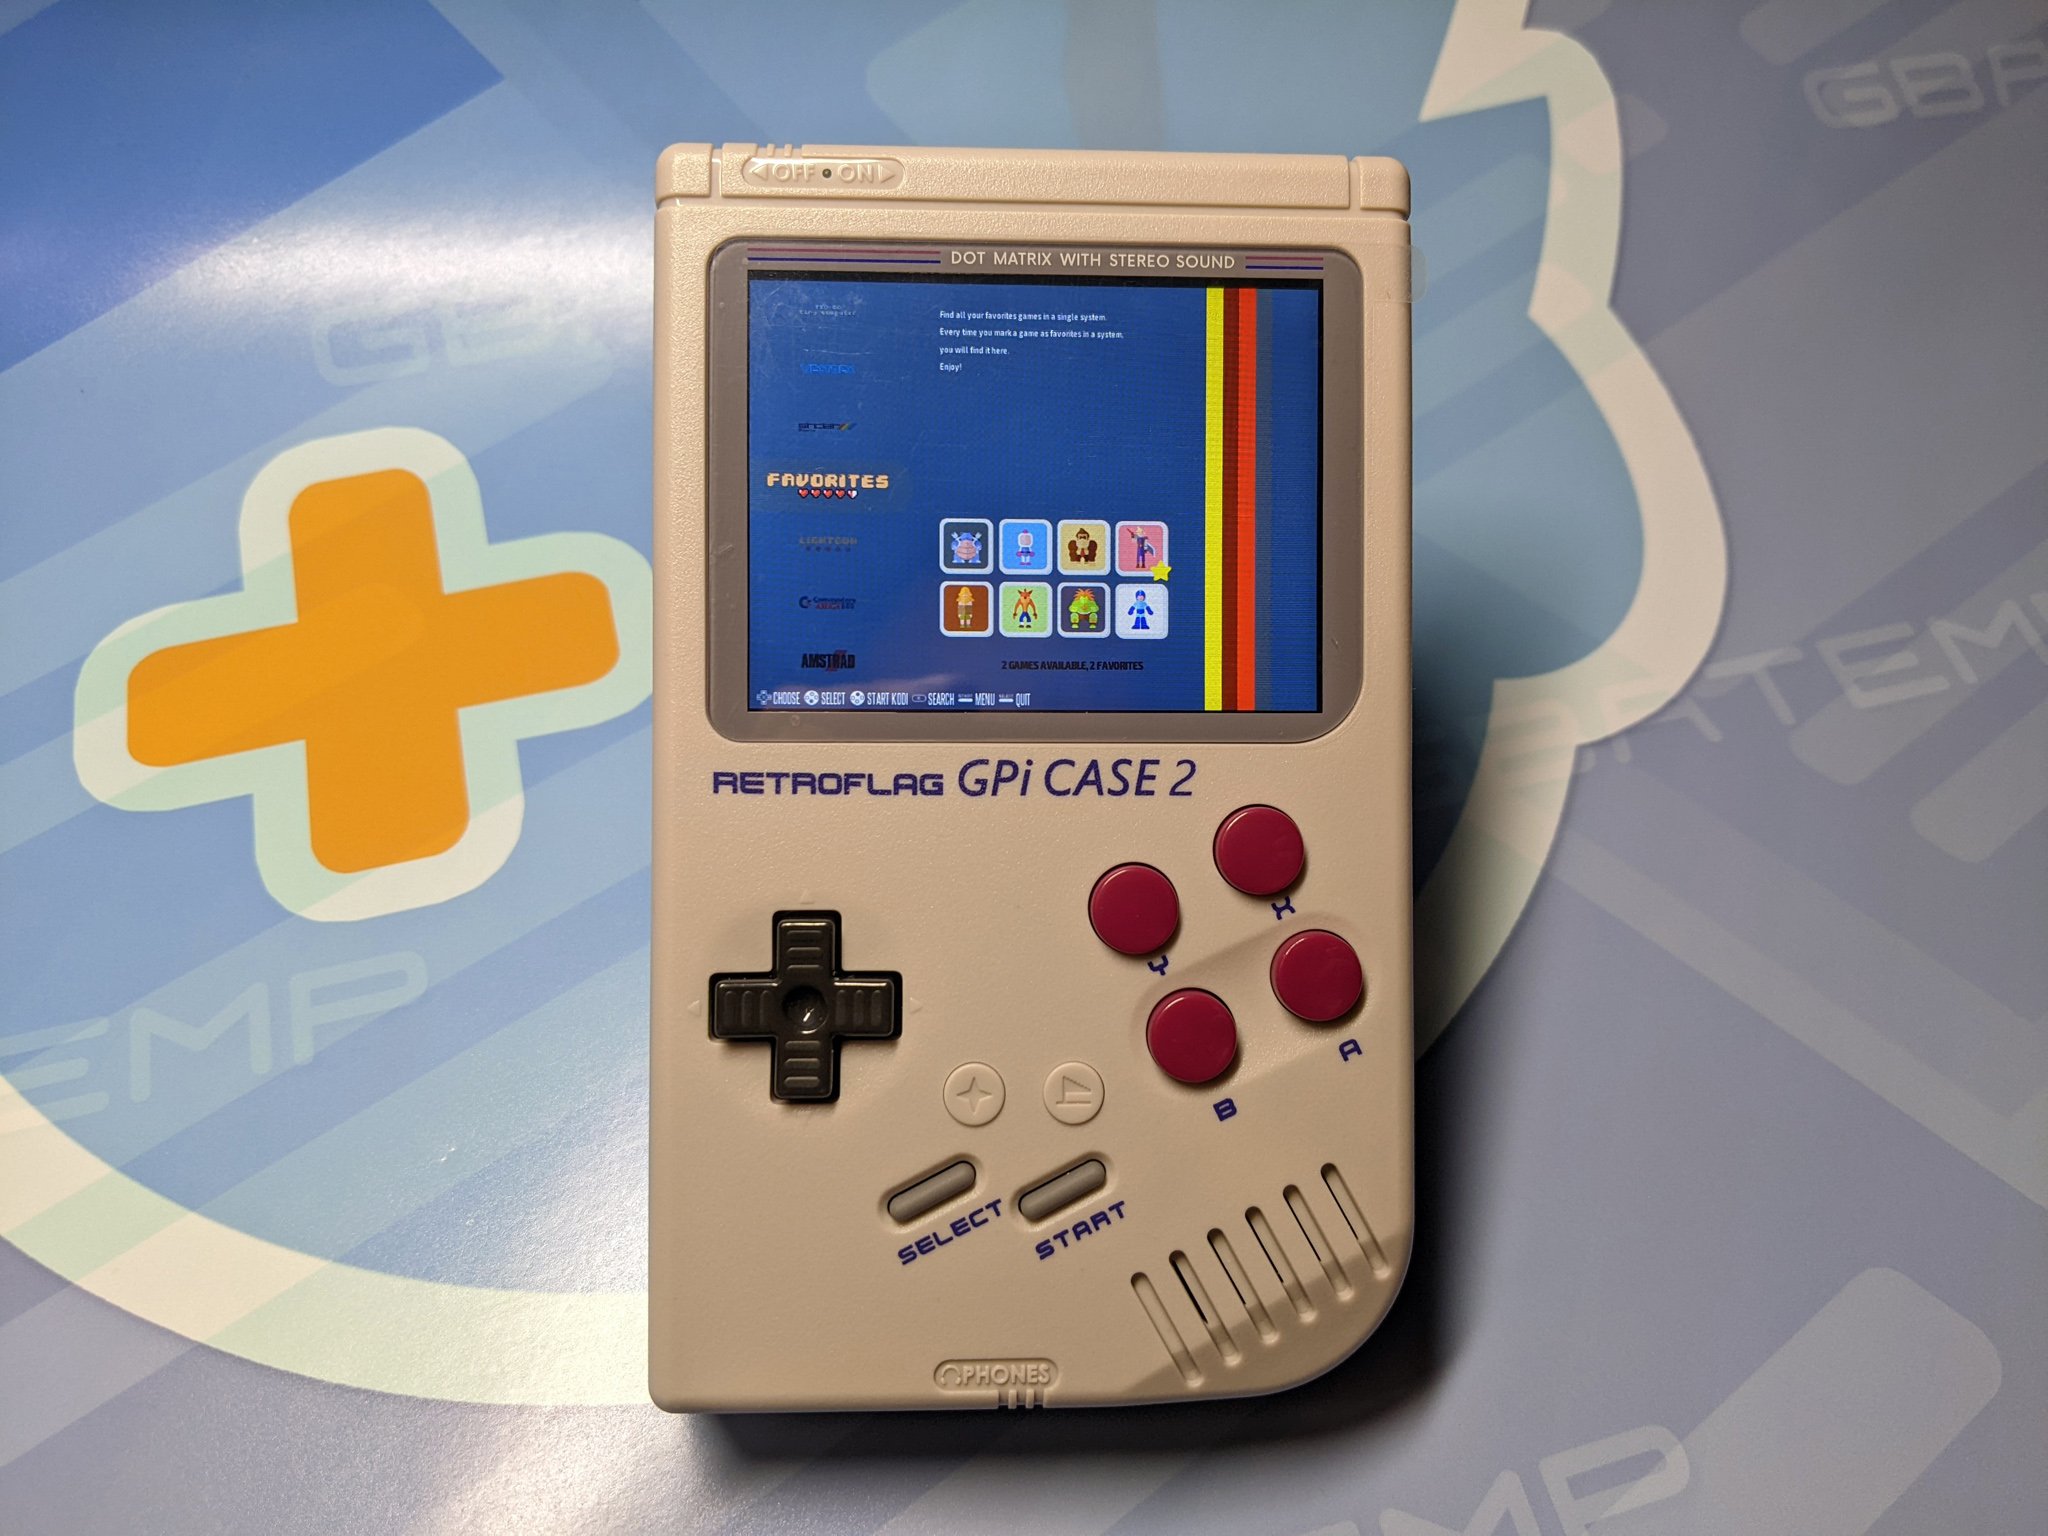 Retroflag GPi Case 2 first look | GBAtemp.net - The Independent Video Game  Community